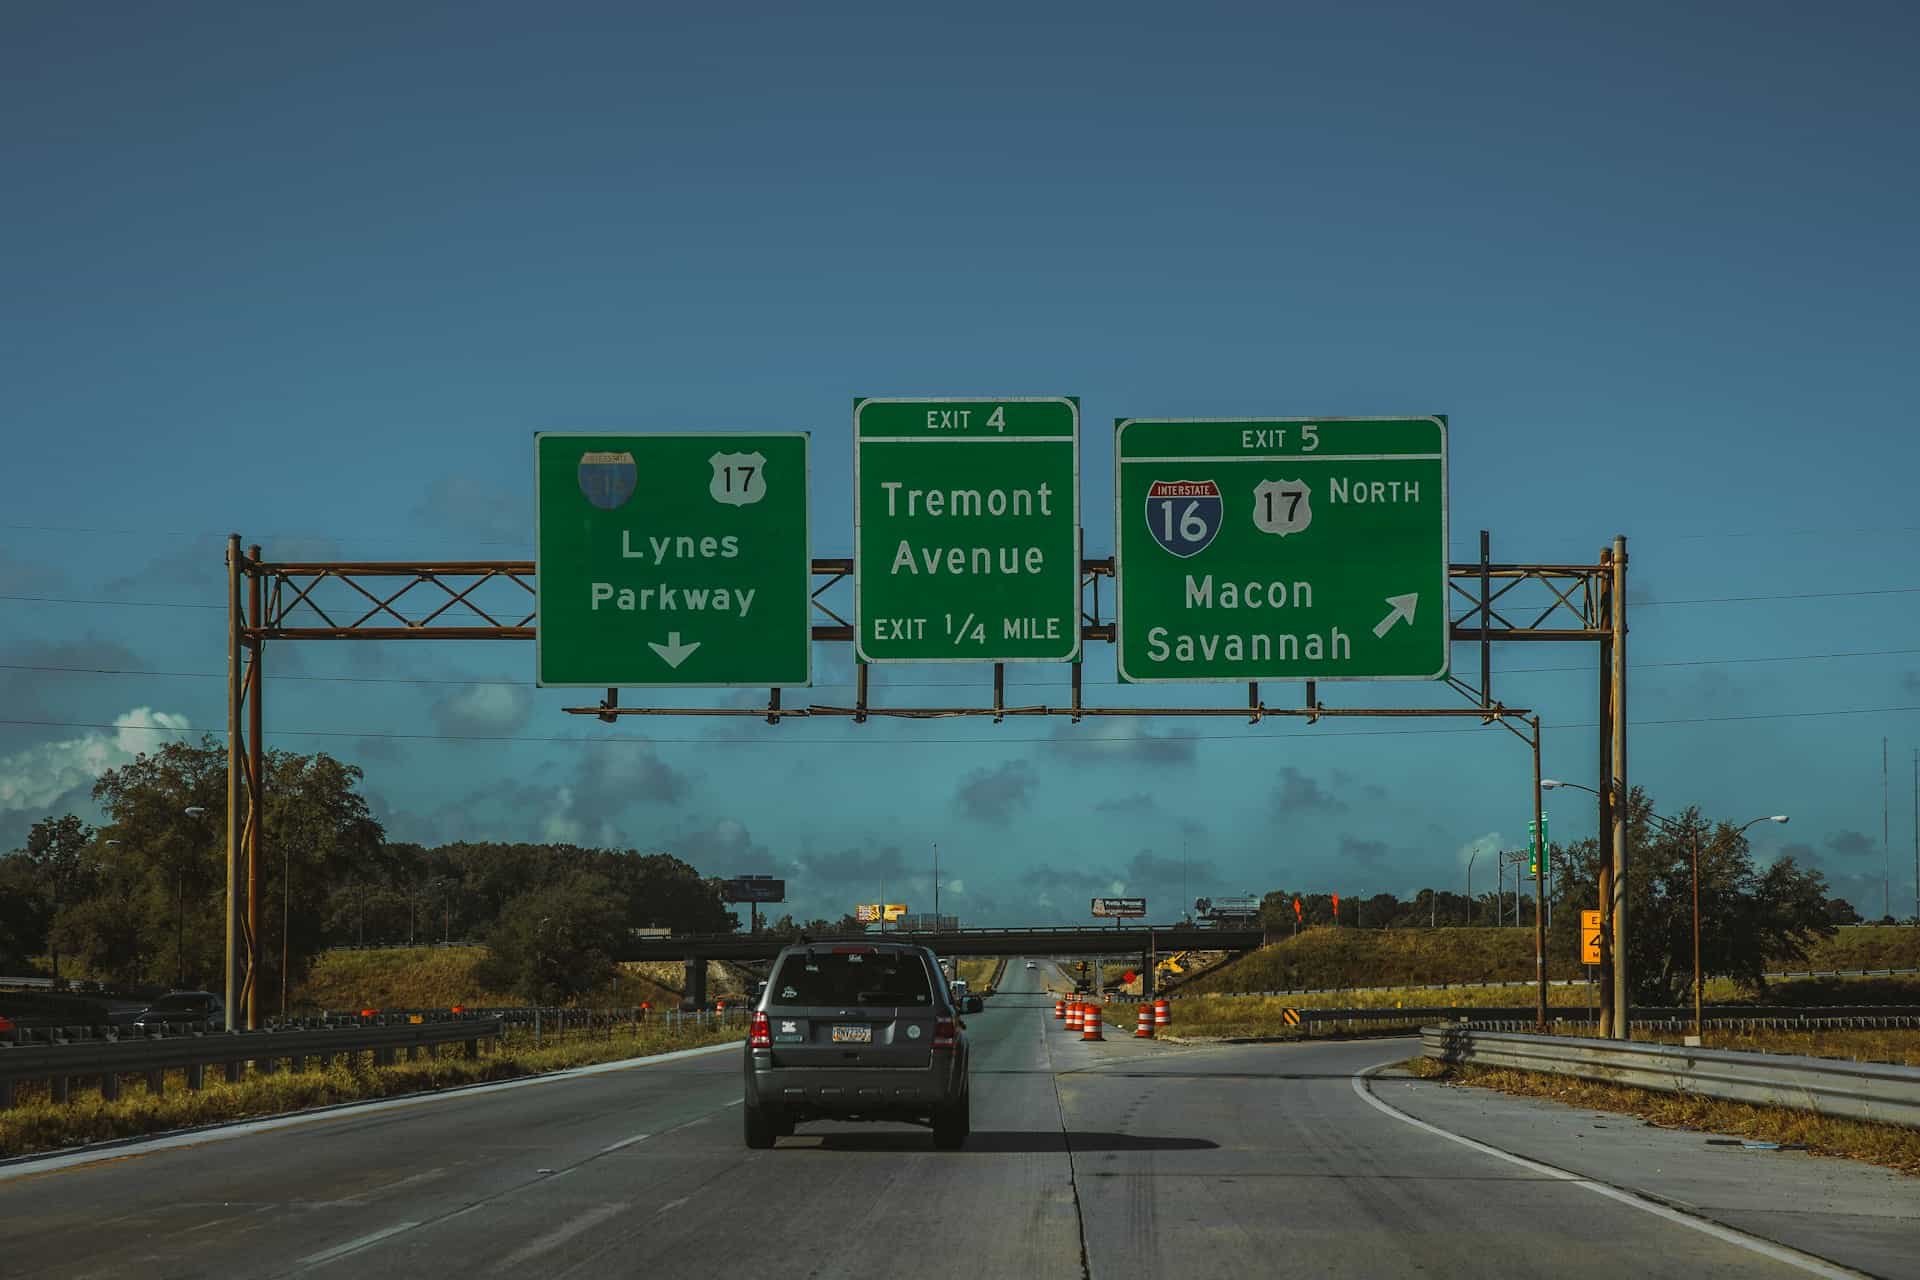 Highway and Expressway Guide Signs